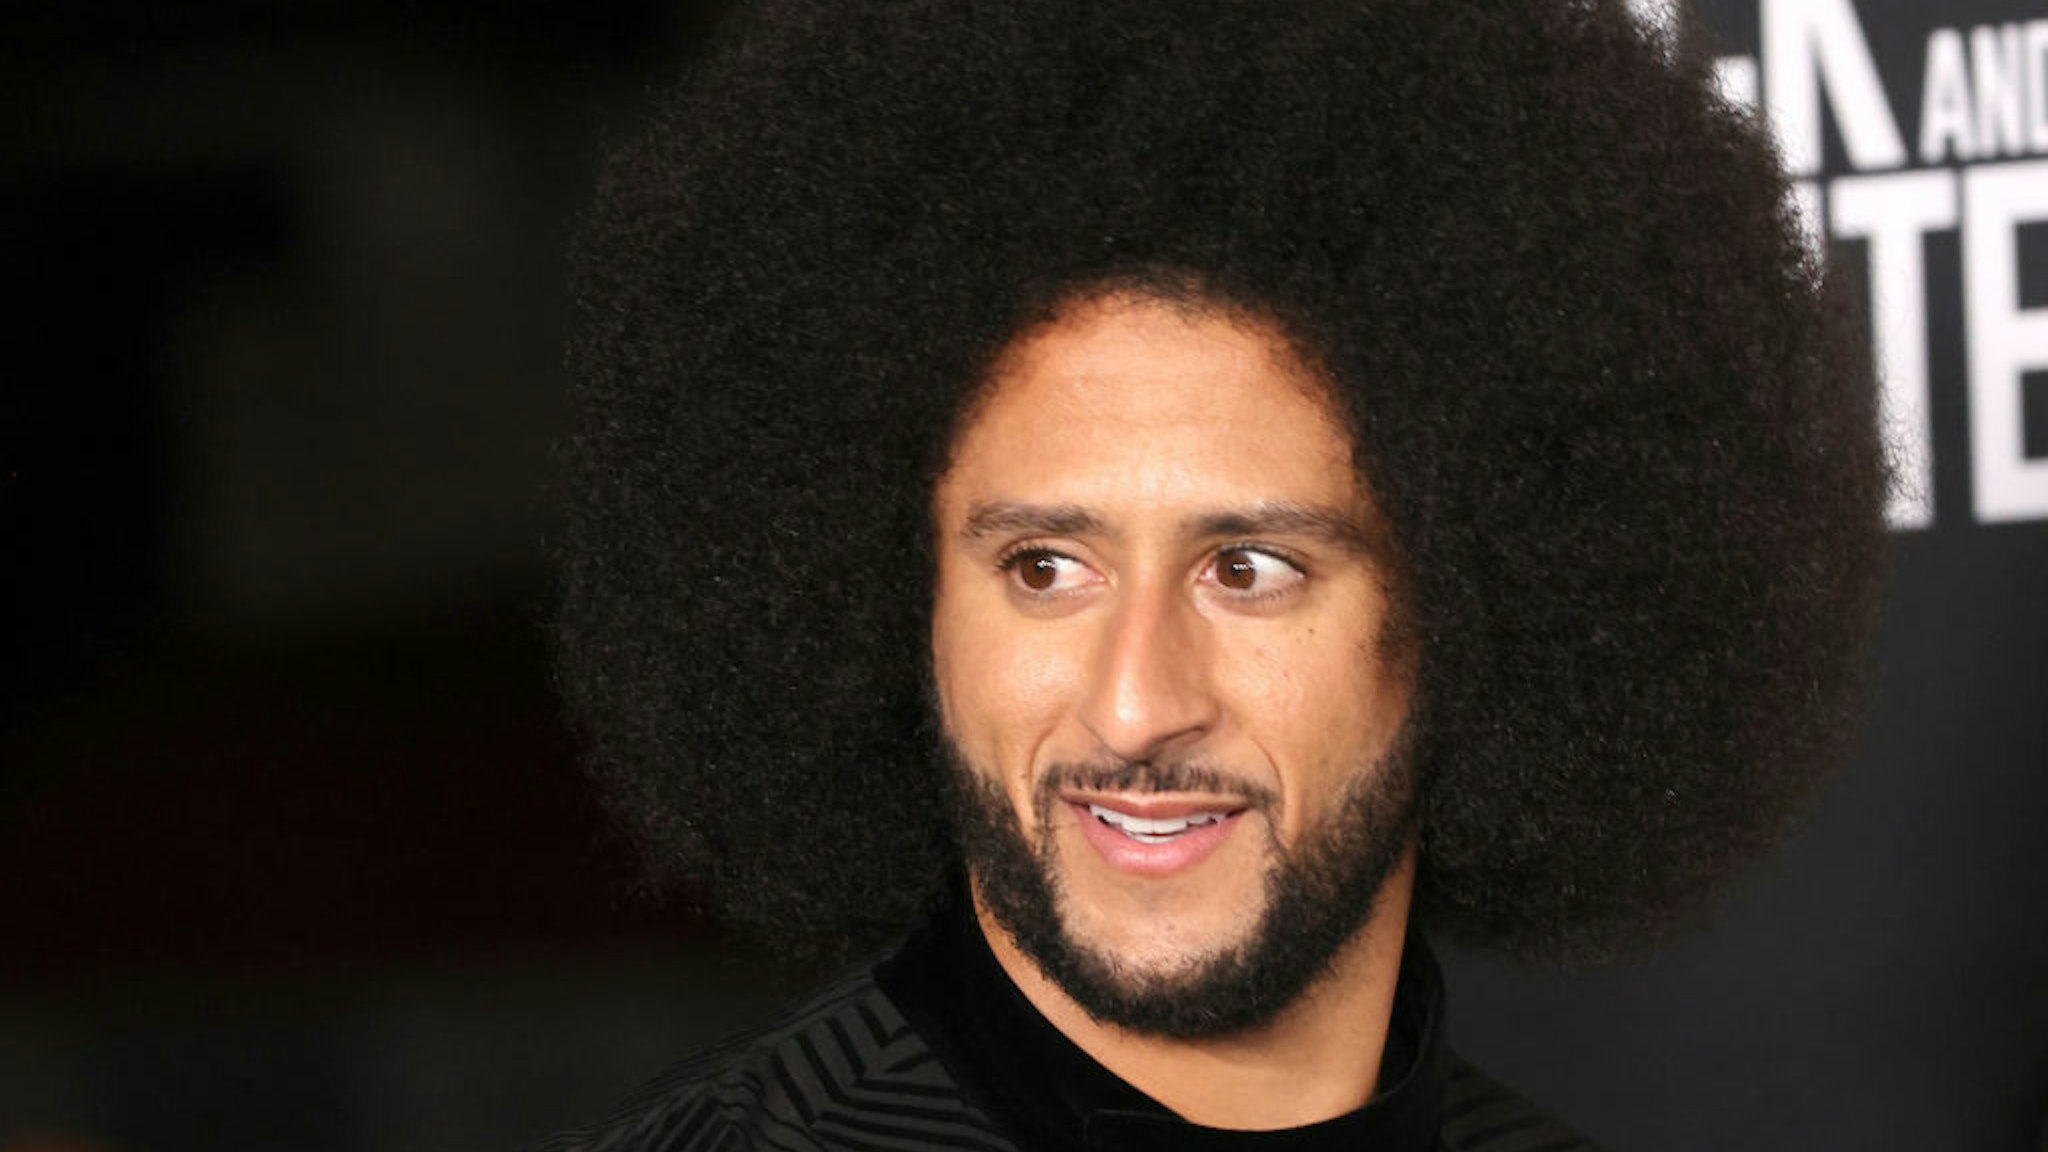 LOS ANGELES, CALIFORNIA - OCTOBER 28: Colin Kaepernick arrives at the Los Angeles premiere of Netflix's "Colin In Black And White" at Academy Museum of Motion Pictures on October 28, 2021 in Los Angeles, California. (Photo by Kevin Winter/WireImage,)